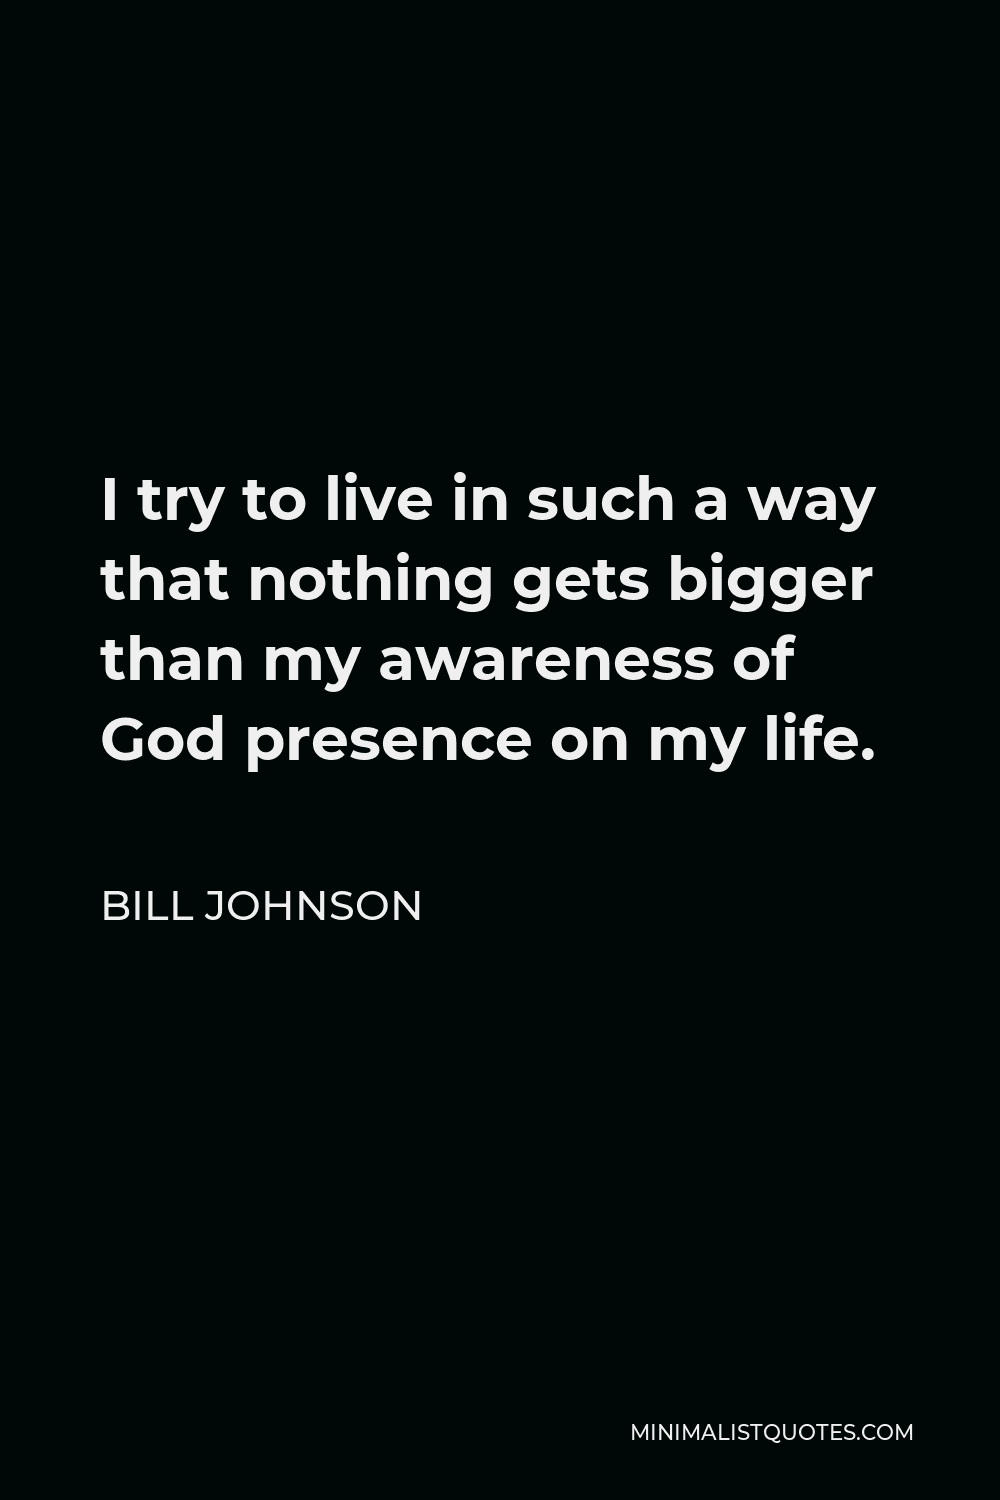 Bill Johnson Quote - I try to live in such a way that nothing gets bigger than my awareness of God presence on my life.